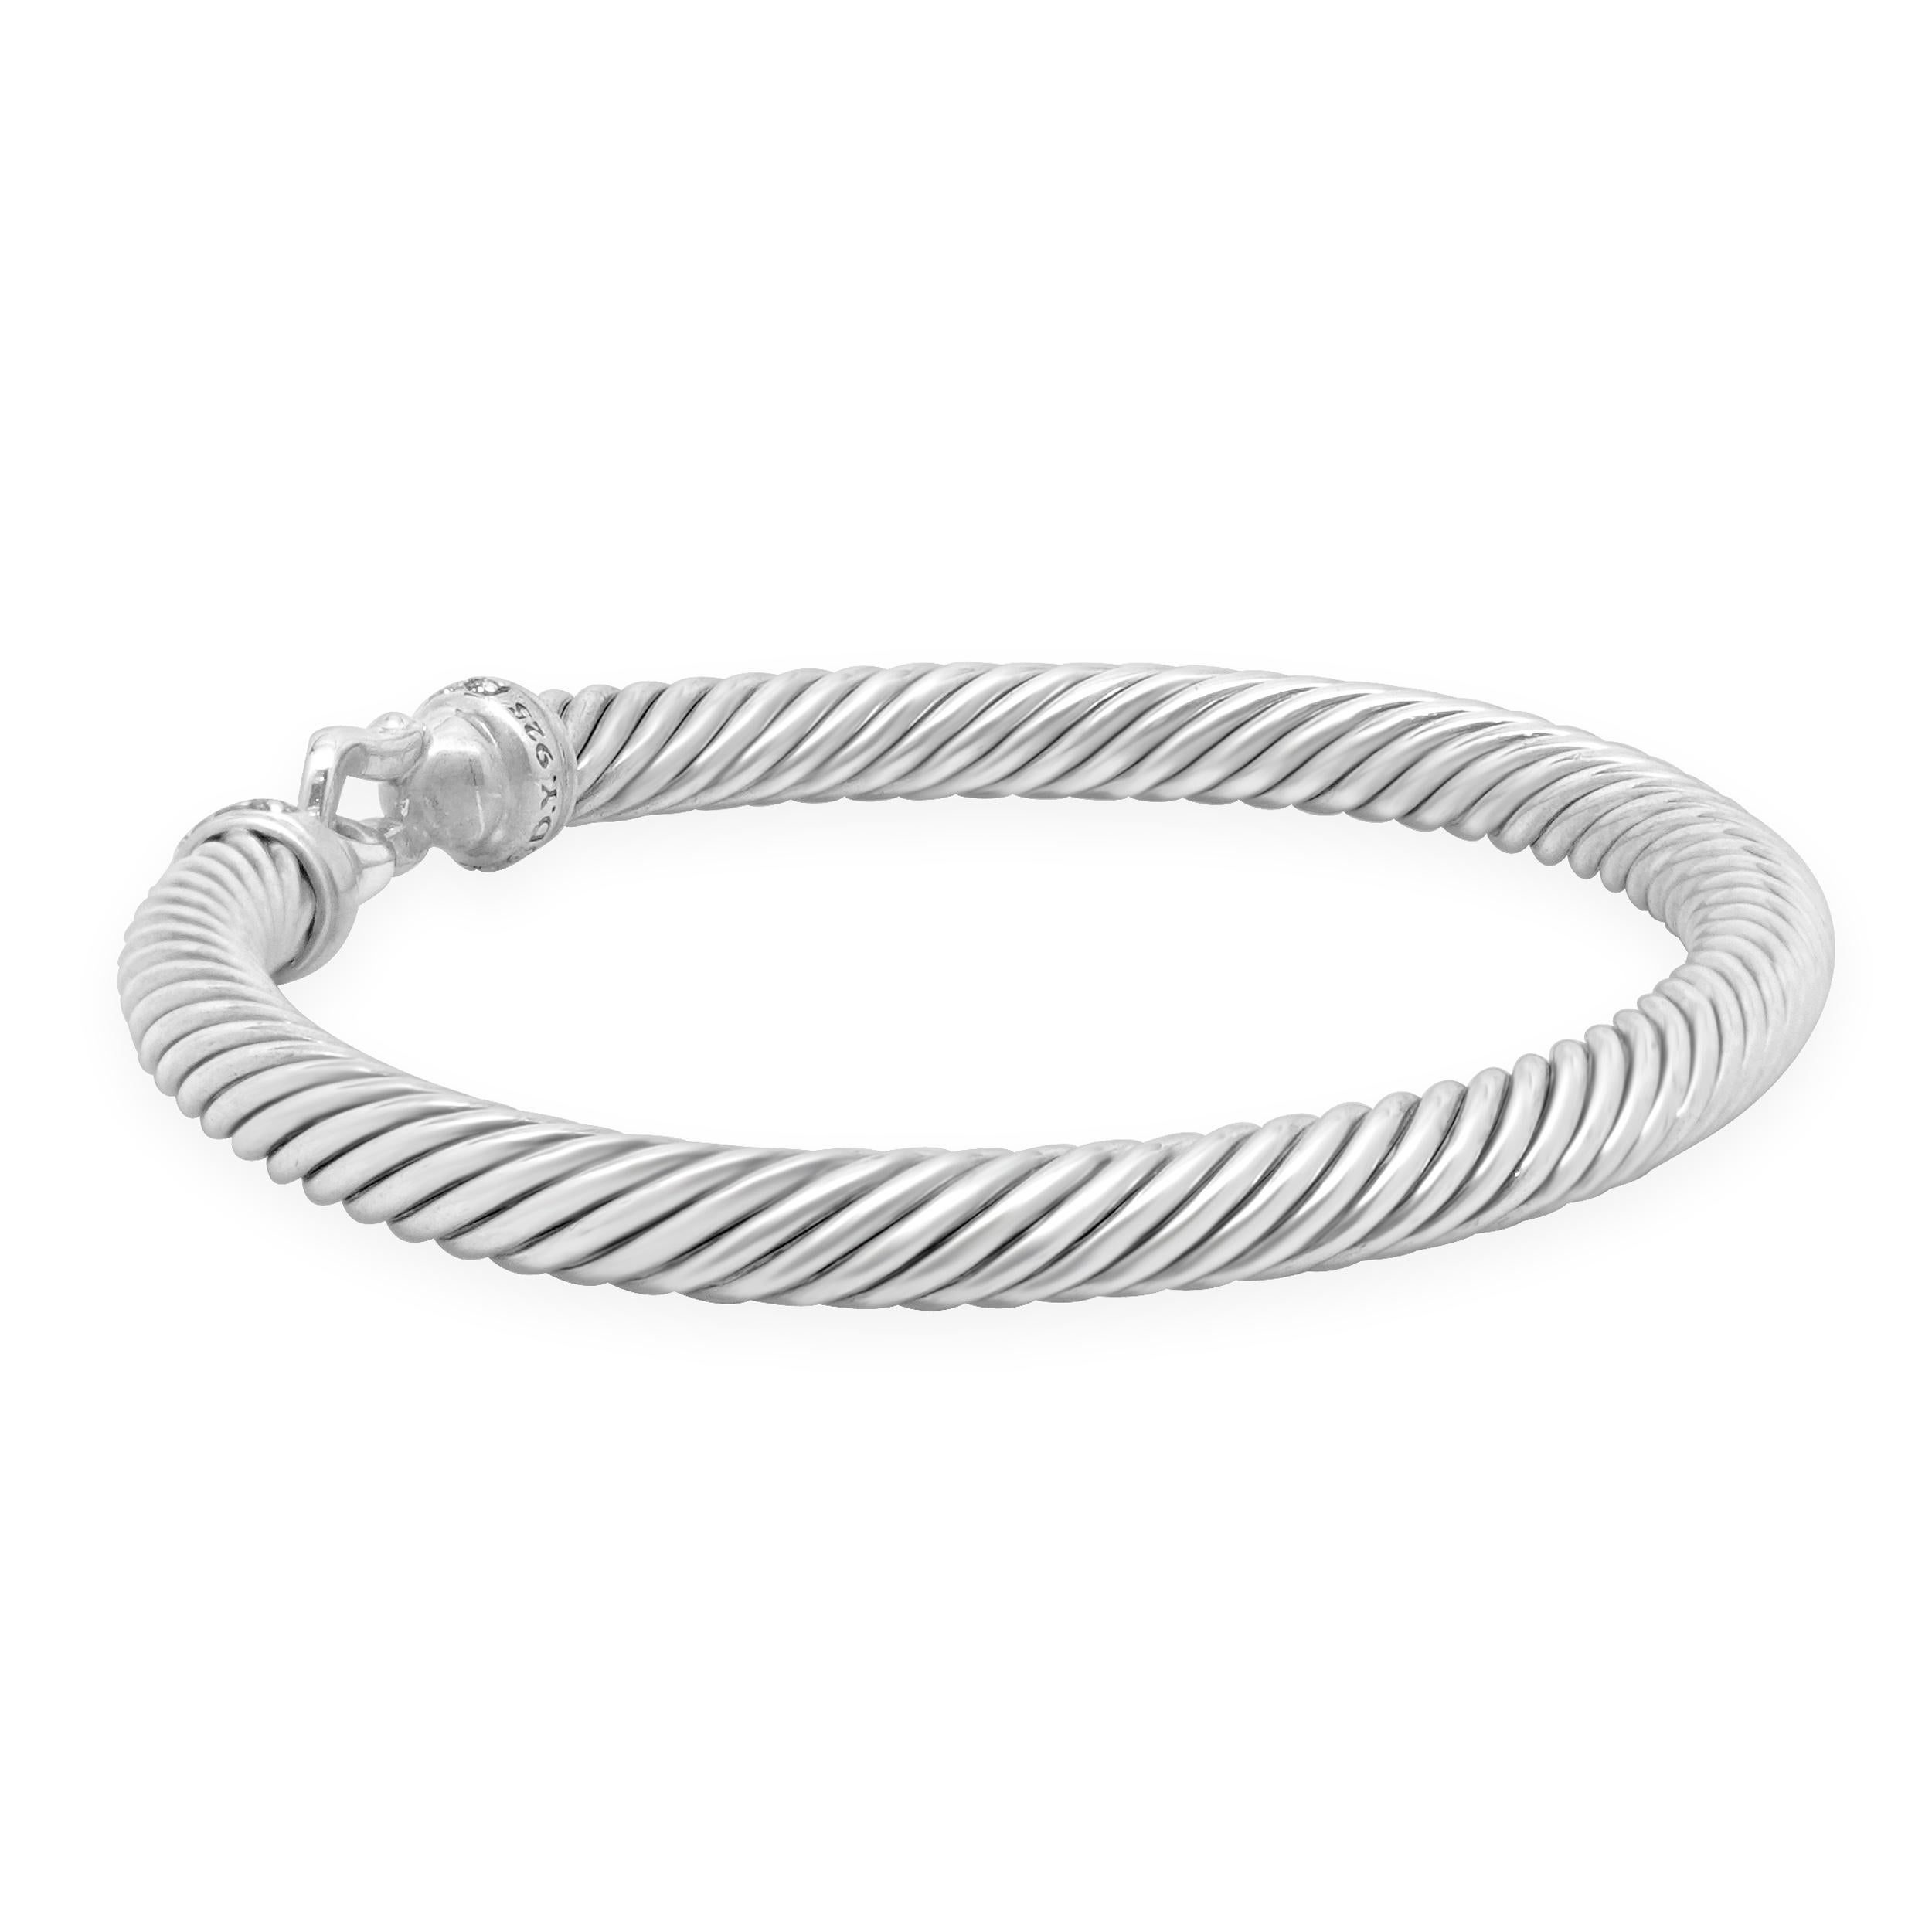 Designer: David Yurman
Material: sterling silver 
Diamond: 16 round cut = 0.12cttw
Color: H
Clarity: SI1
Weight: 28.30 grams
